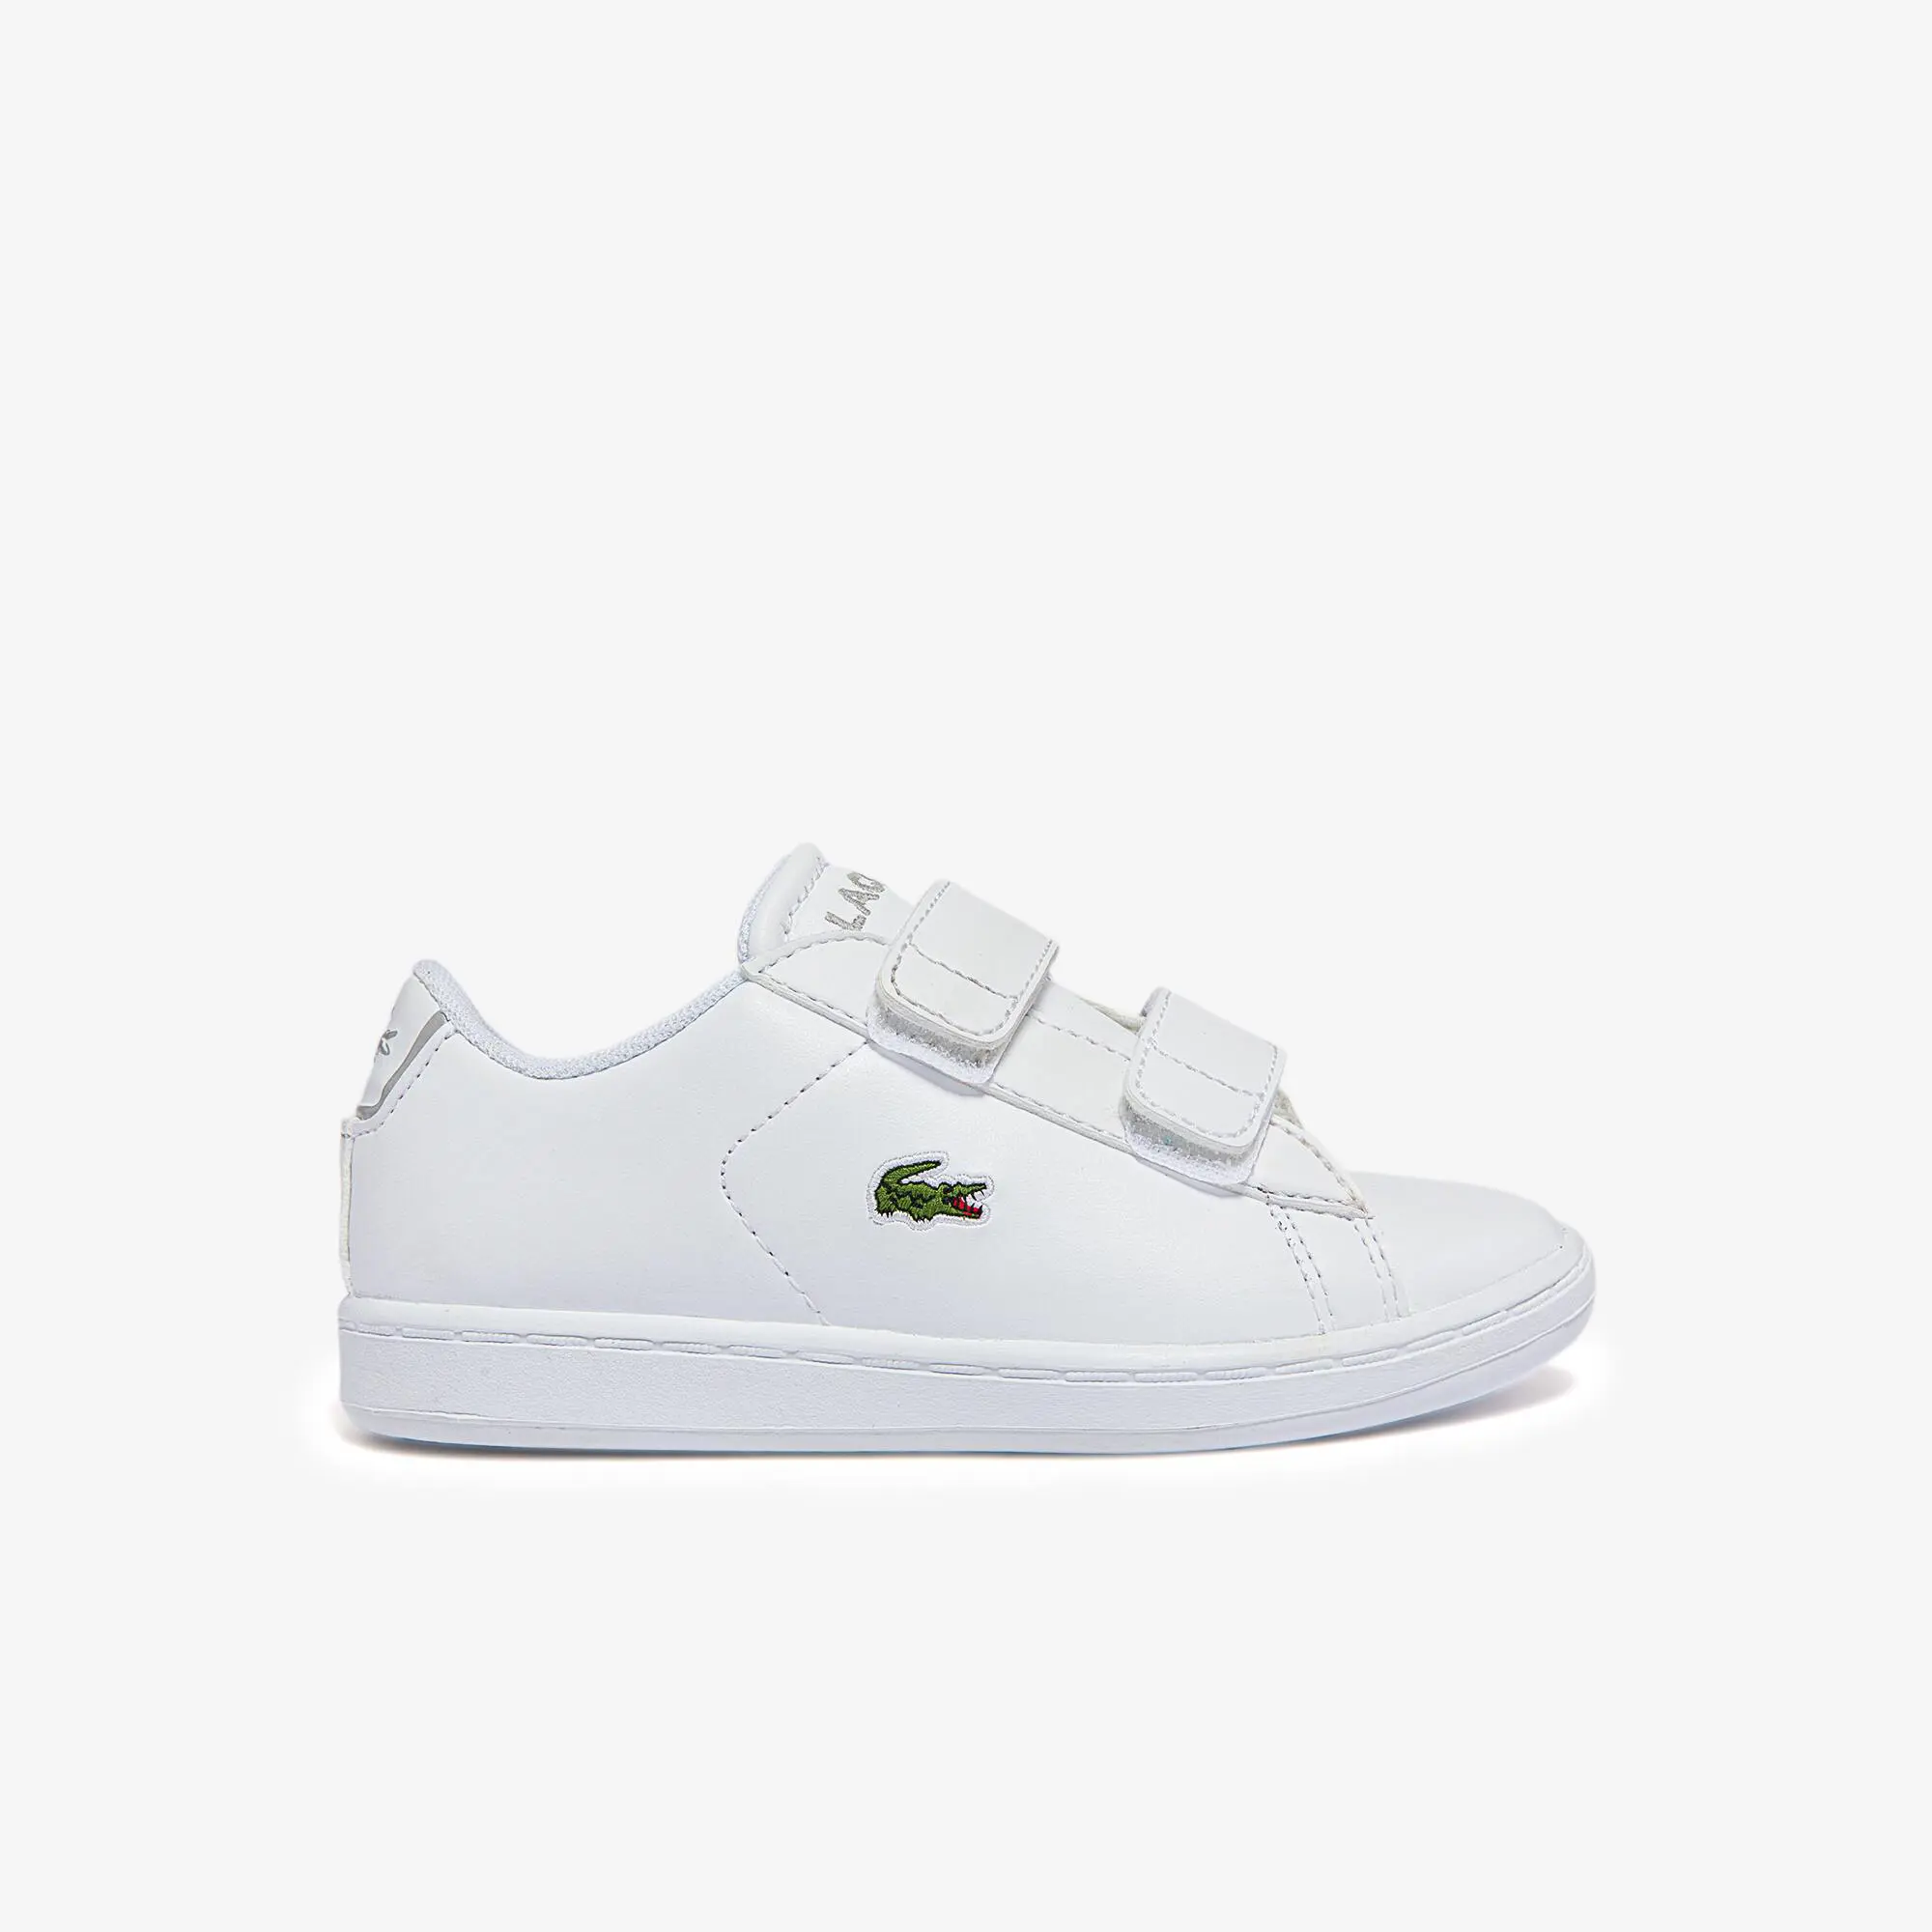 Lacoste Infants' Carnaby Evo BL Synthetic Trainers. 1